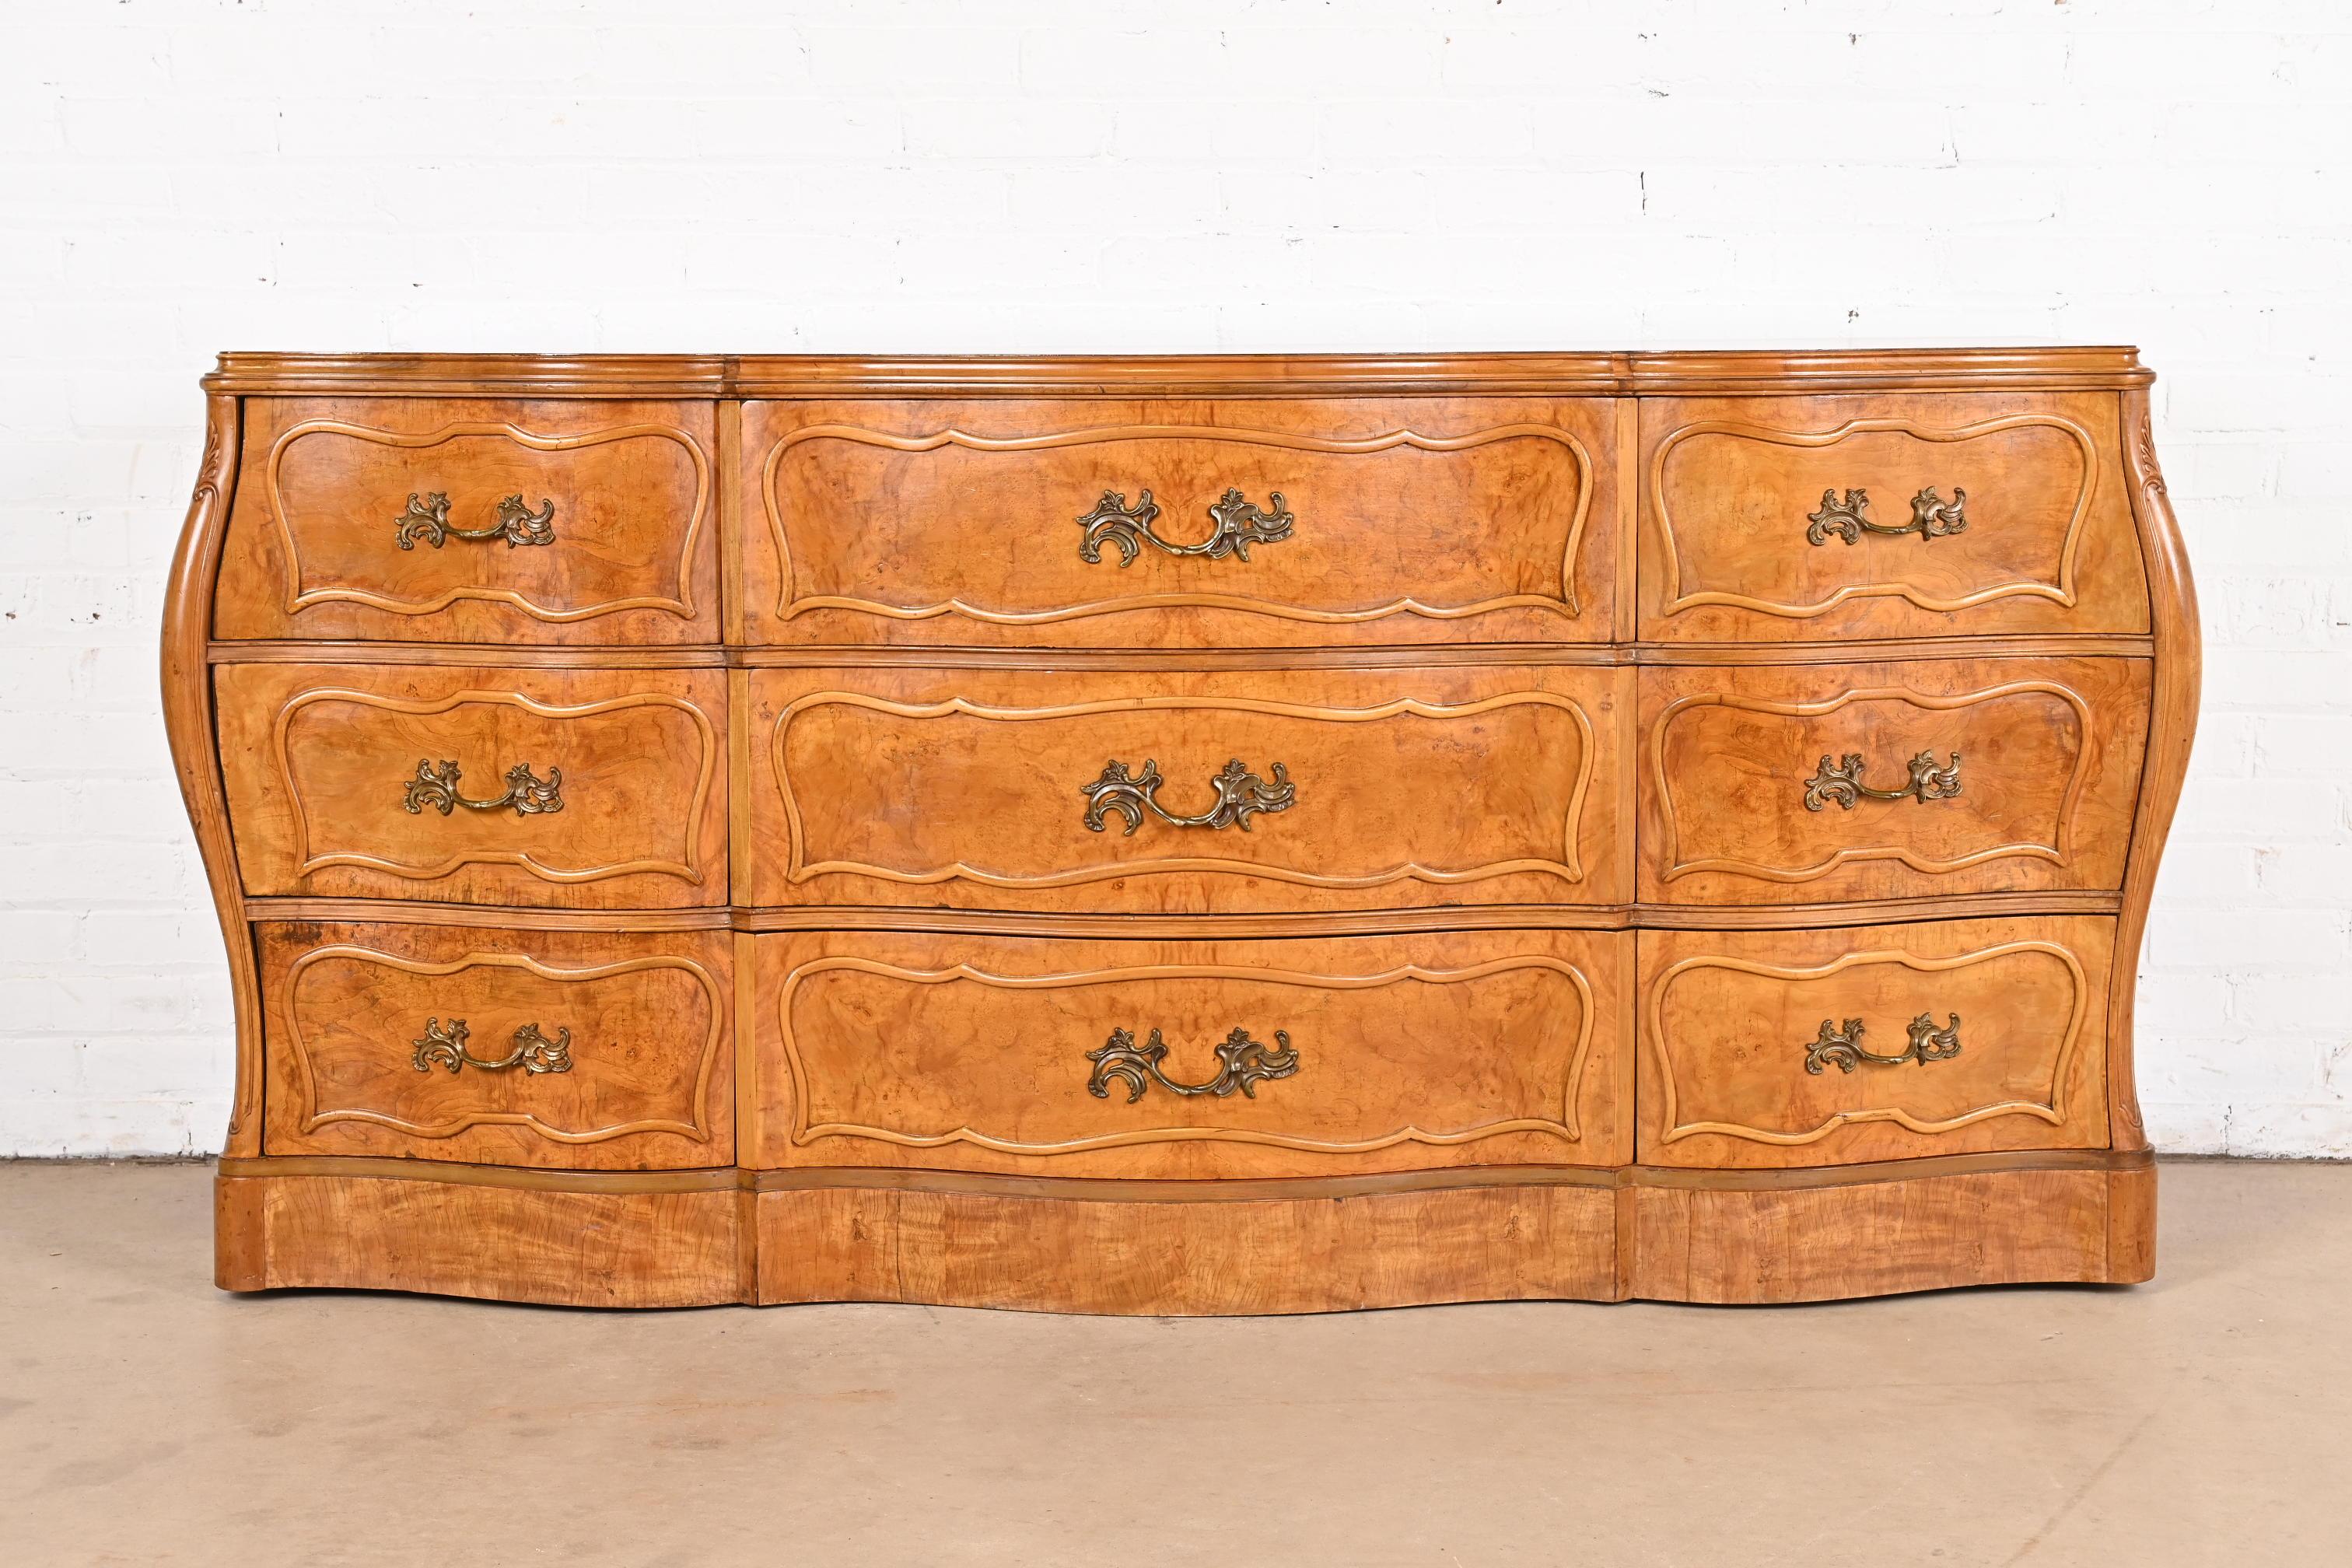 An exceptional French Provincial Louis XV style bombay form triple dresser or chest of drawers

By Romweber

Retailed by Hathaway's Furniture of New York

USA, Circa 1940s

Stunning book-matched burled olive wood, with original brass